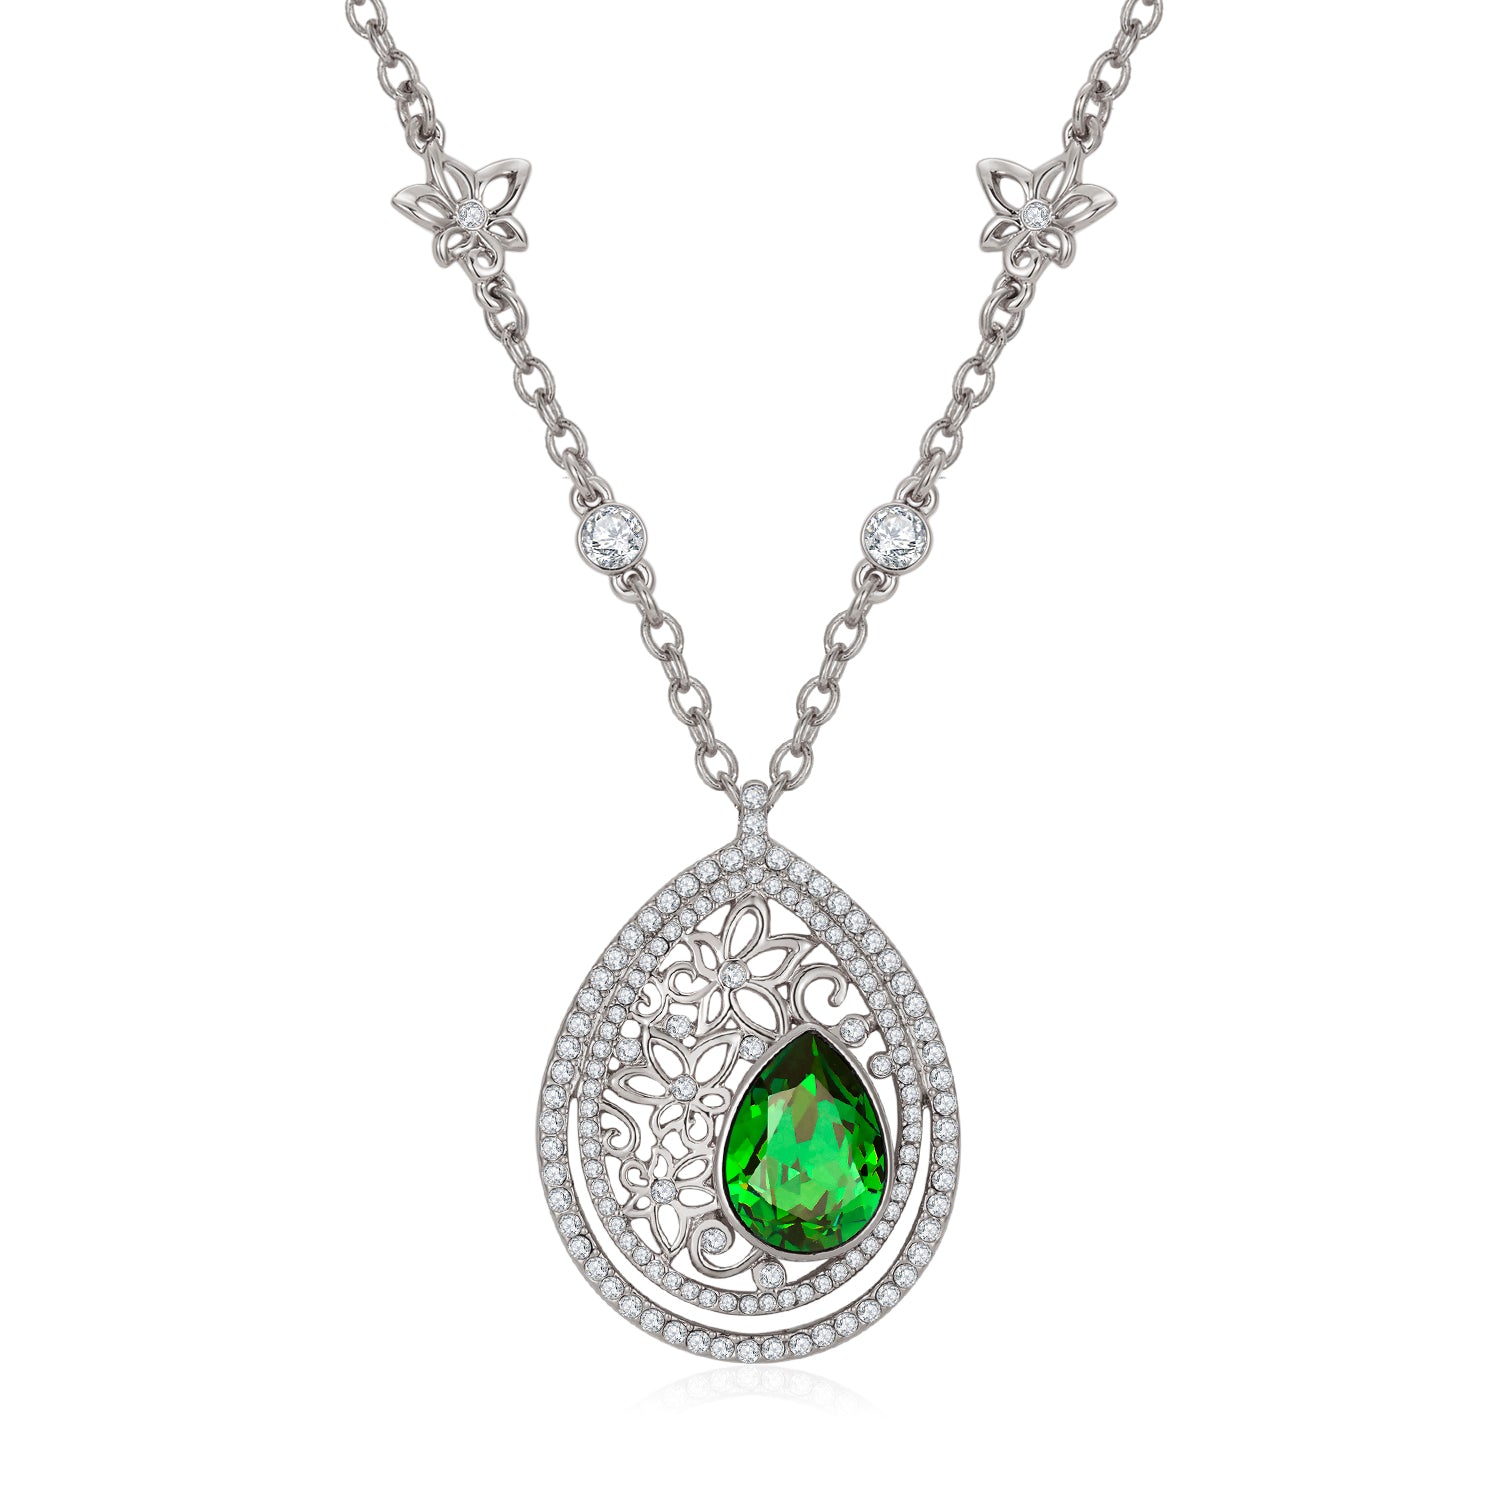 Simple Vicacci Teardrop necklace,Embellished with crystals from Swarovski